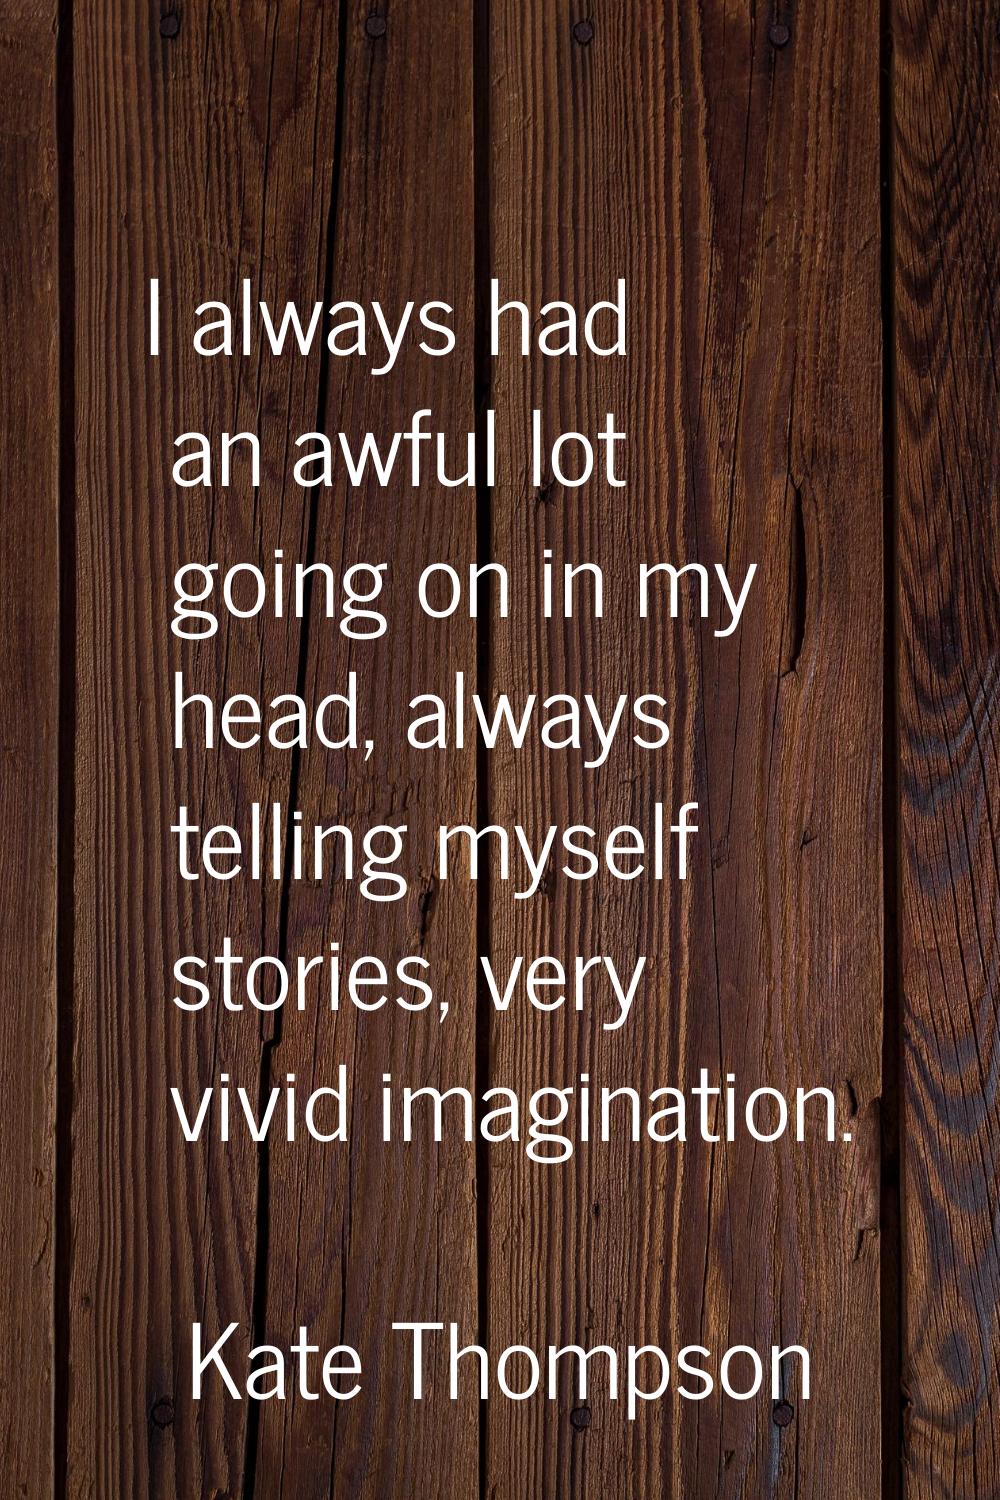 I always had an awful lot going on in my head, always telling myself stories, very vivid imaginatio